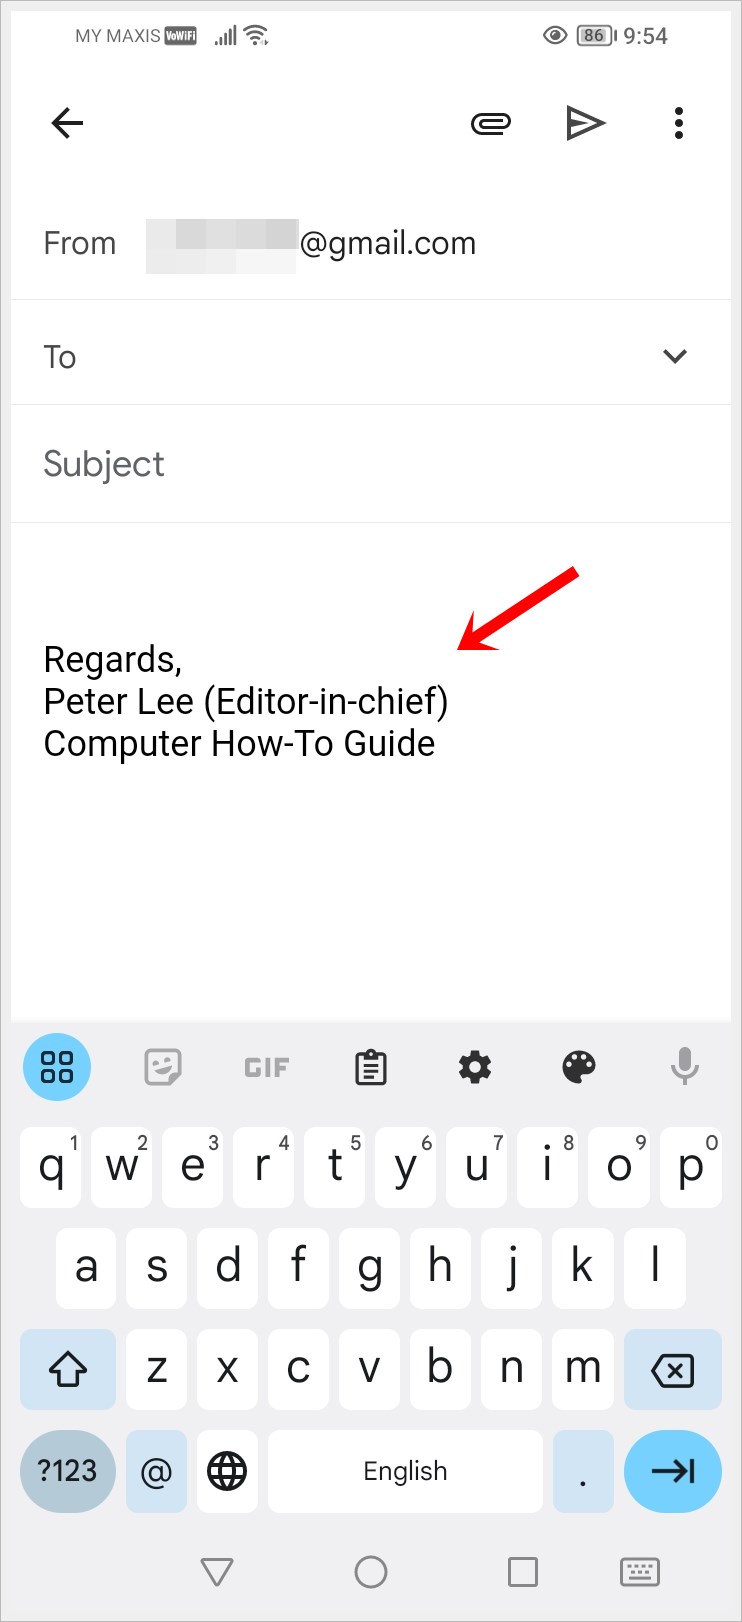 This image displays a screenshot of composing a Gmail email, with the default Gmail mobile signature highlighted.